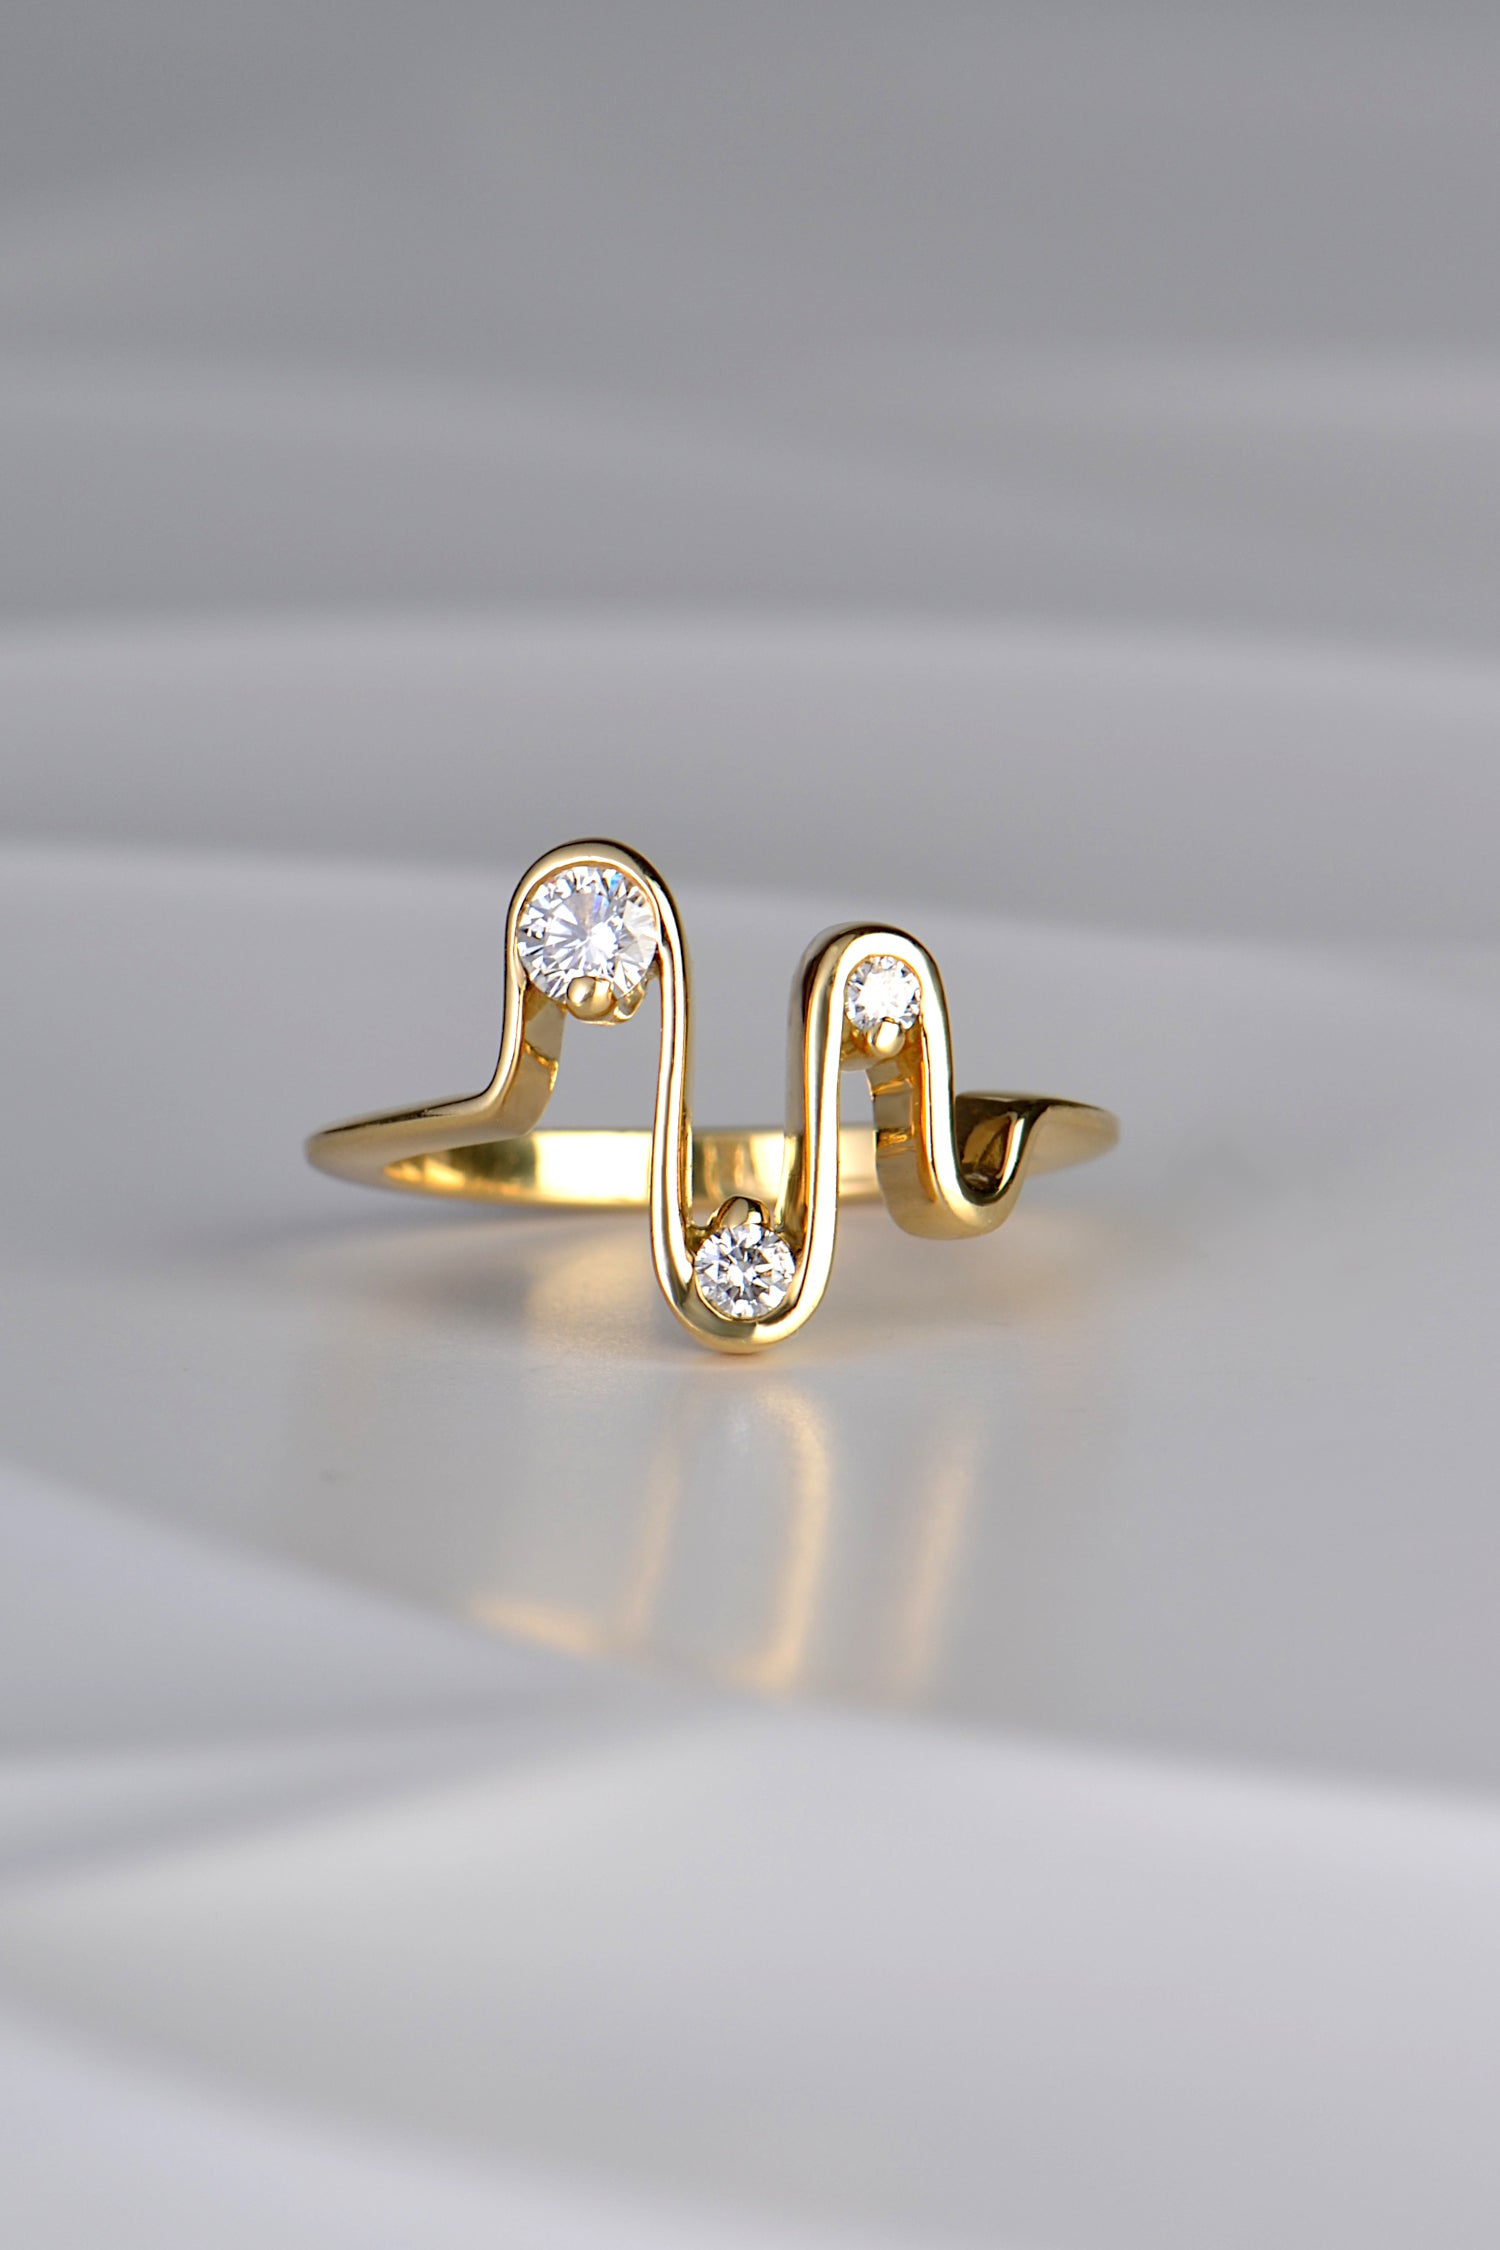 an 18ct yellow gold wavy ring with four waves and three diamonds inspired by a heartbeat